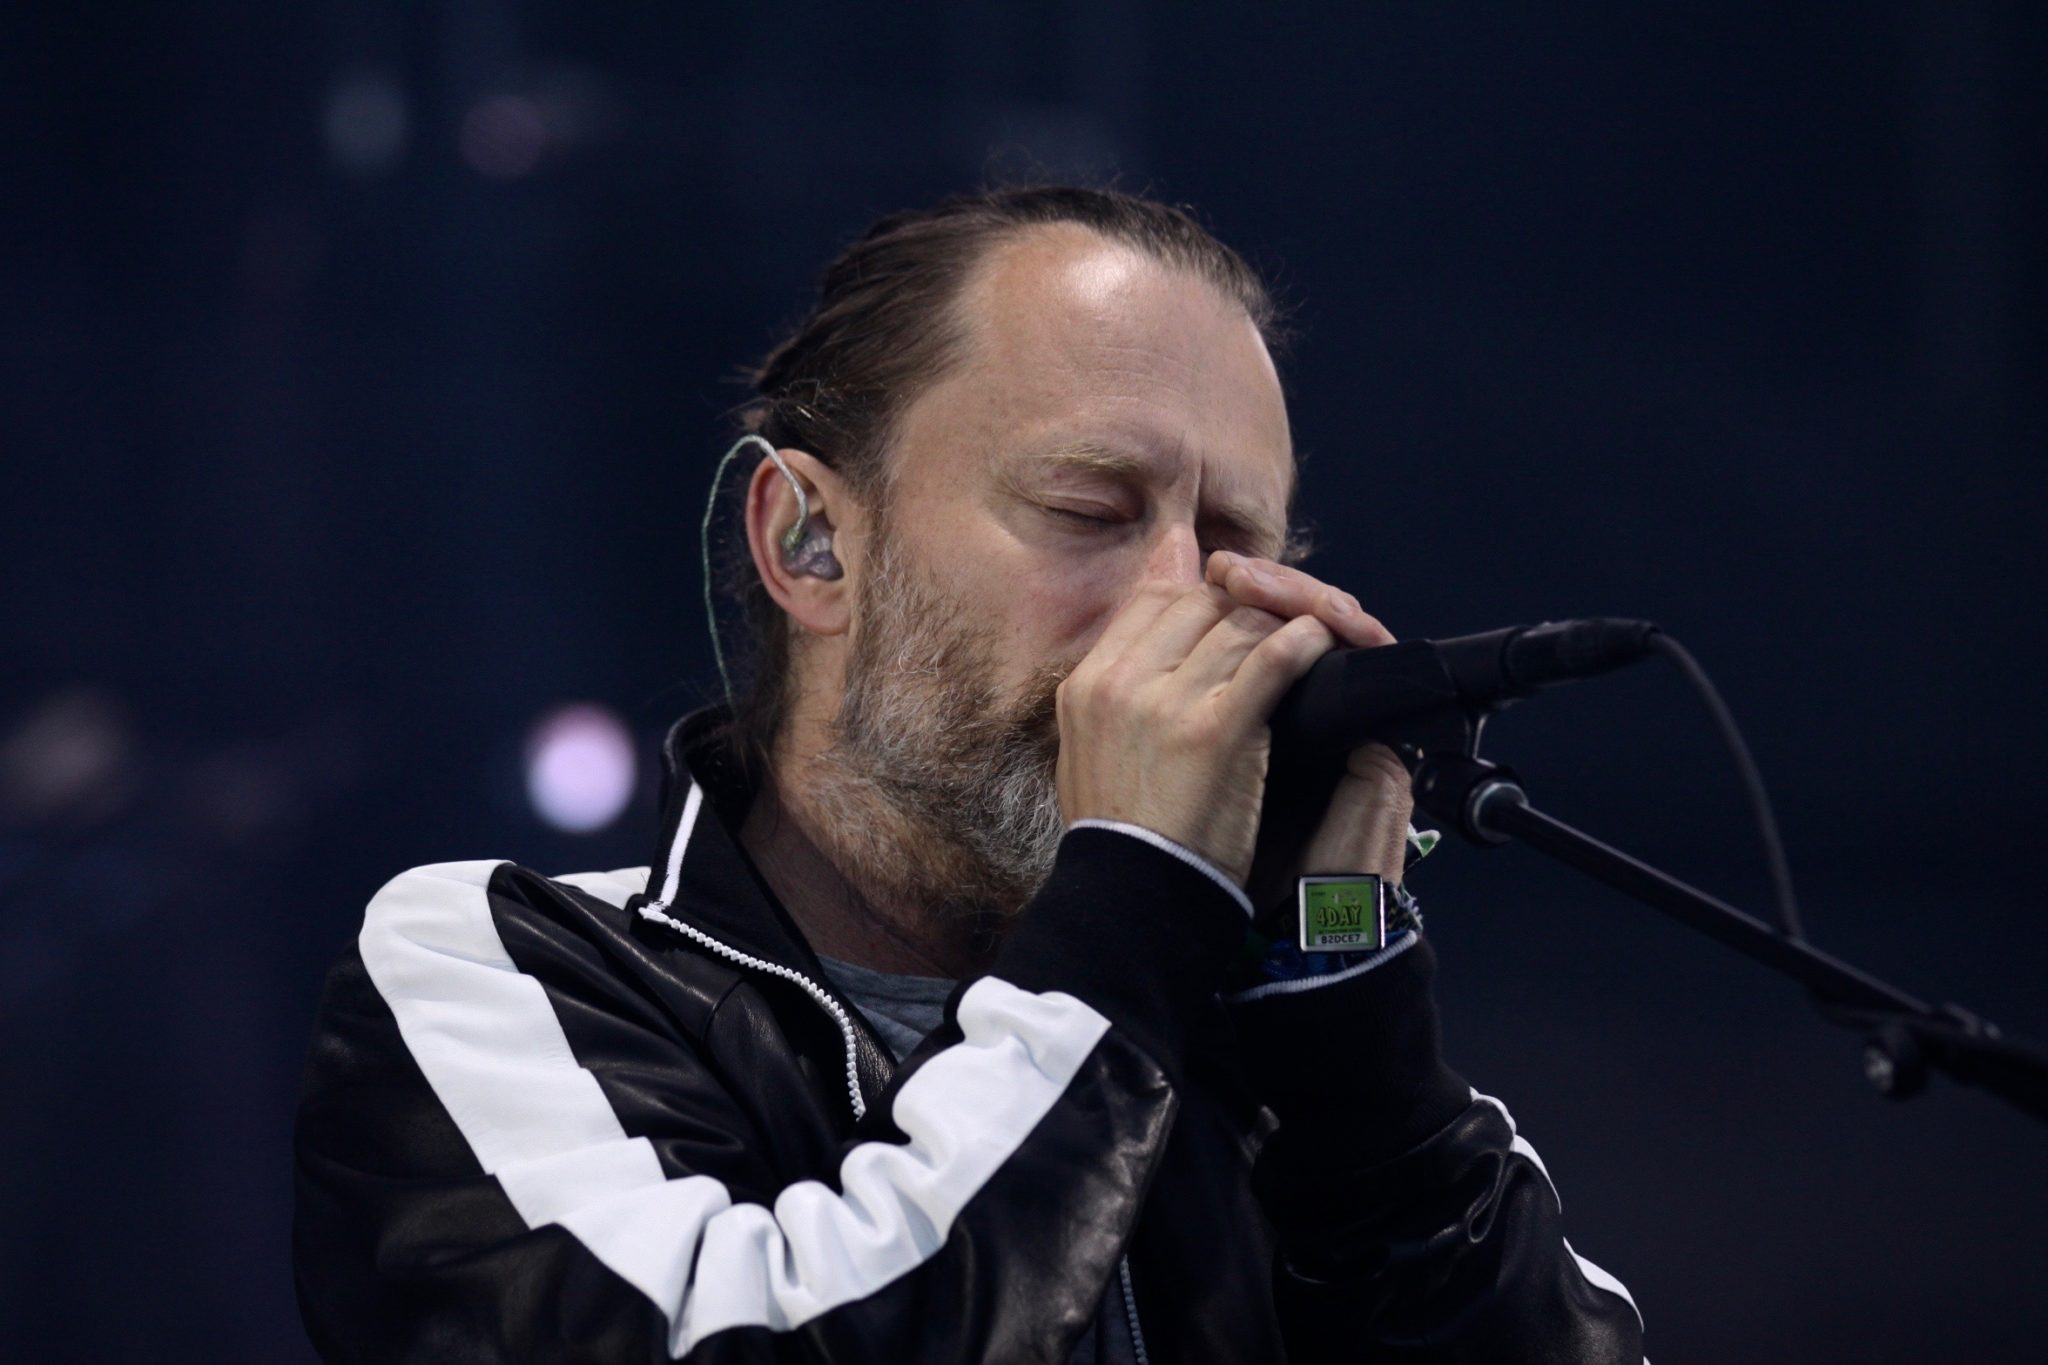 Thom Yorke live onstage with Radiohead